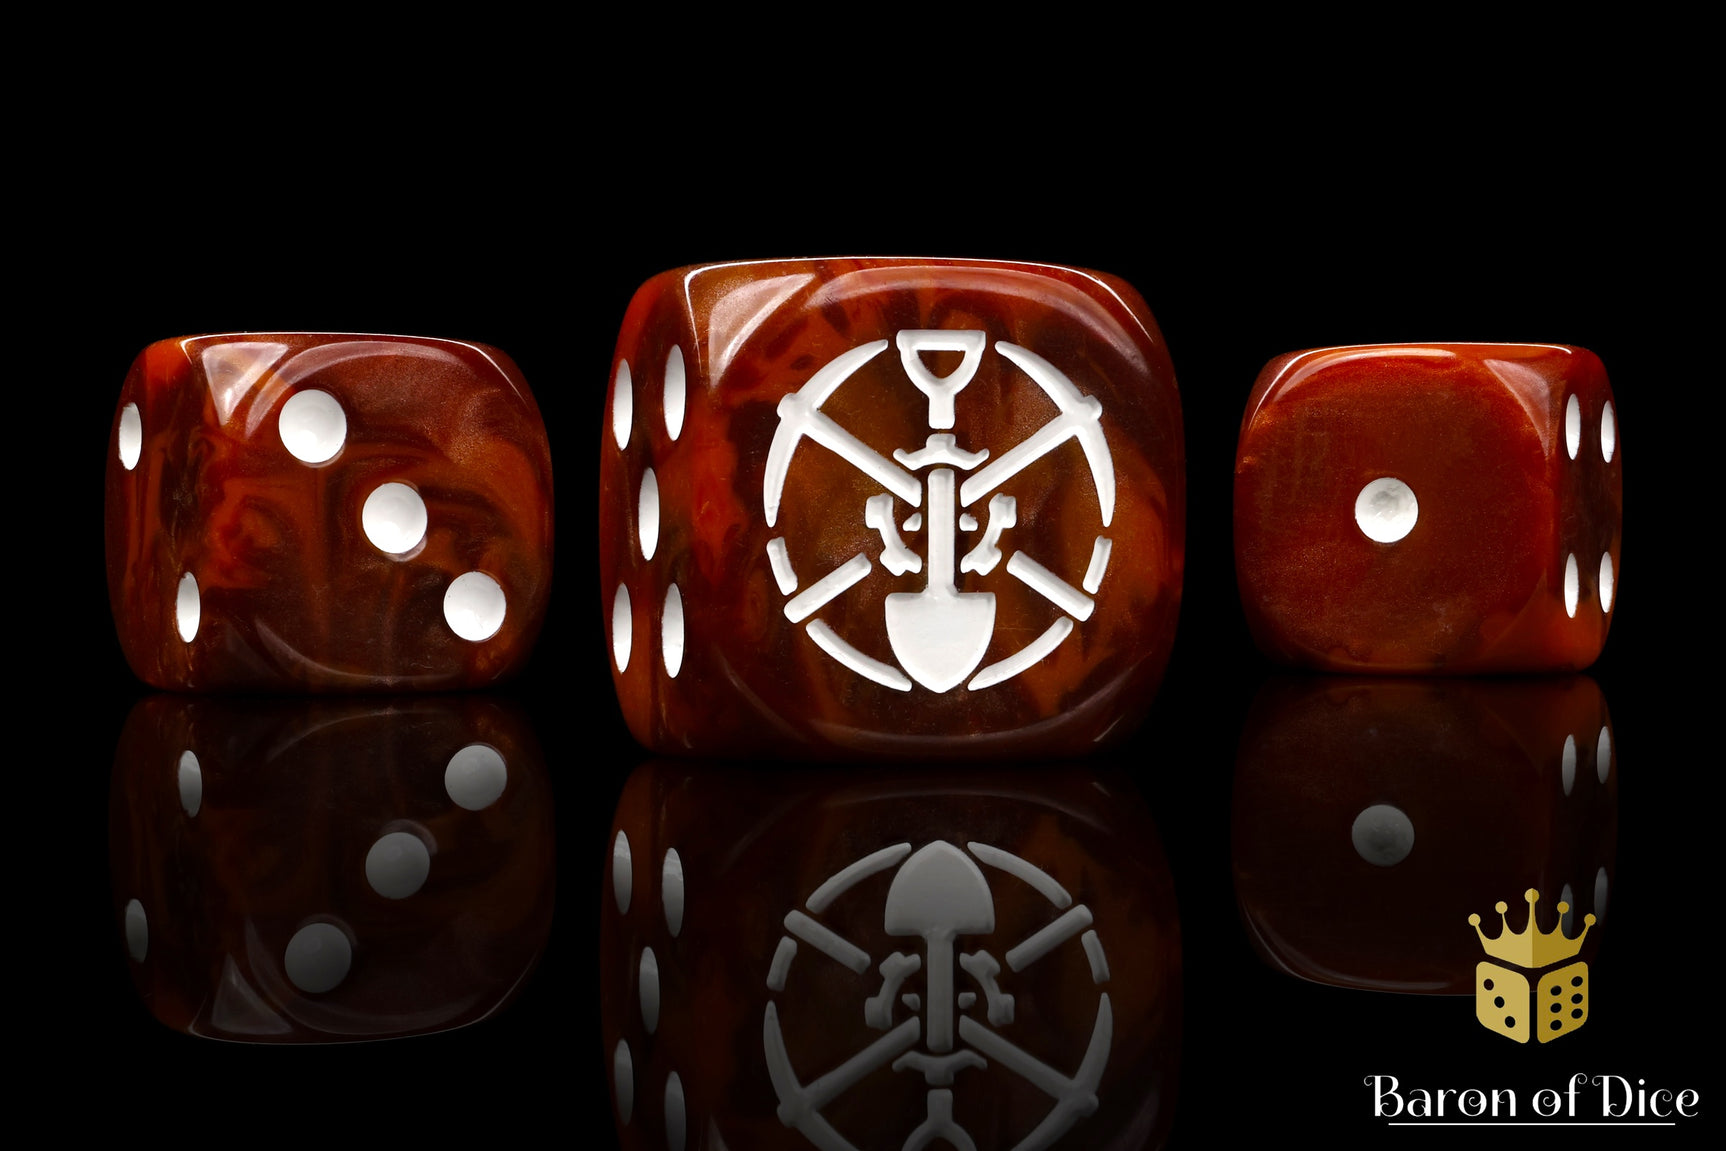 Miners Officially Licensed Guildball Dice Set